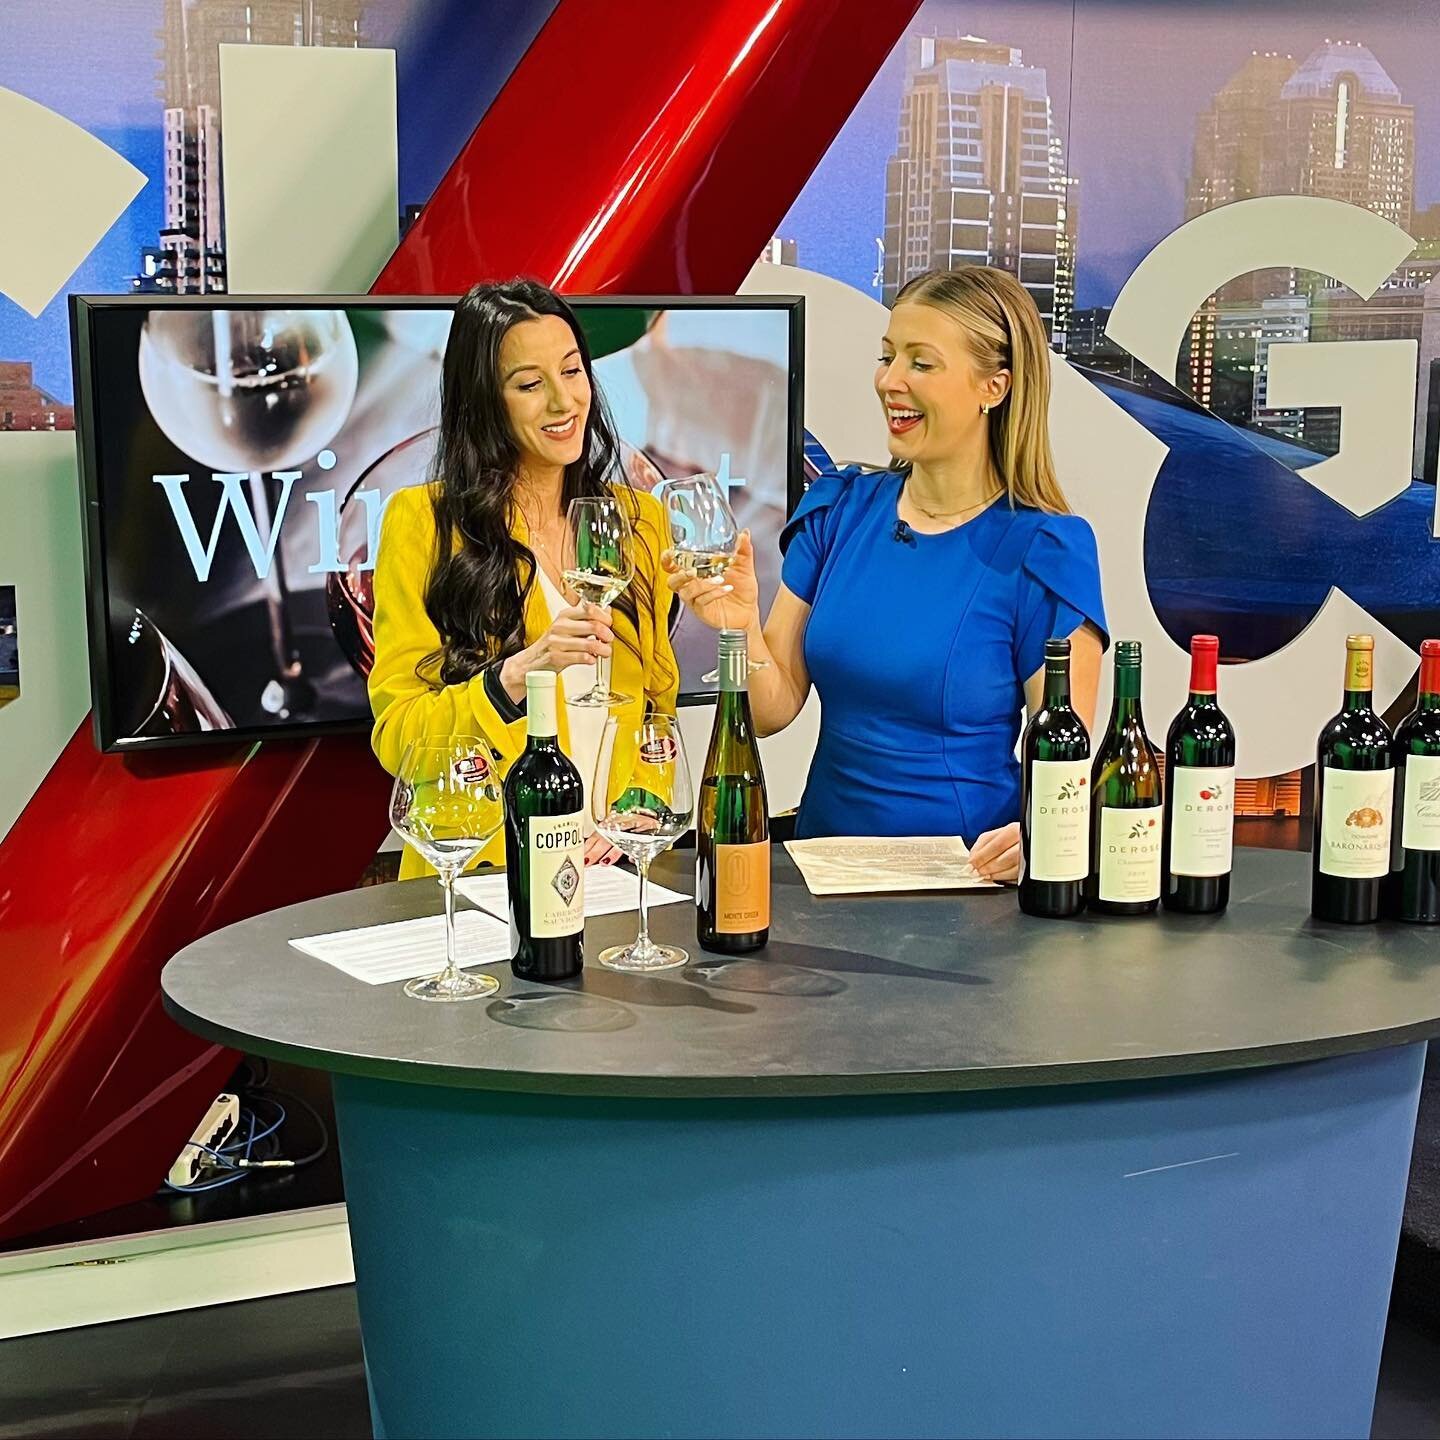 Rise, shine, and drink on camera! @winefest is making its big return tonight in Calgary - after three long years! Tomorrow night&rsquo;s tickets are sold out, but there are still a few left for tonight and tomorrow afternoon. Next weekend, the show m